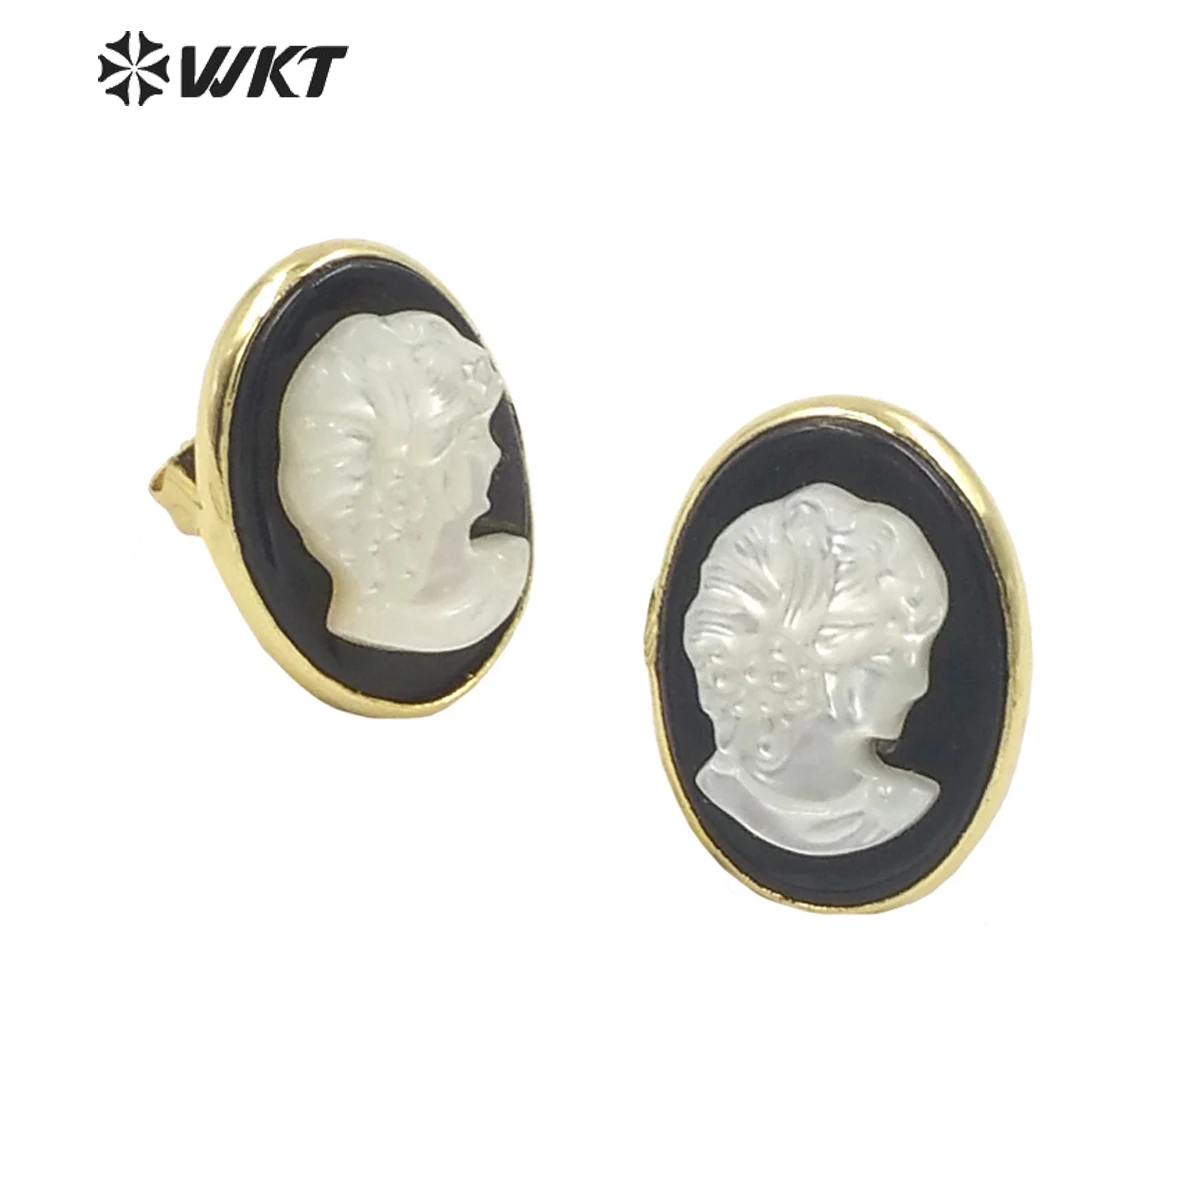 

WT-MPE071 WKT Unique Natural Pearl Earrings Oval Pearl Carved Face Greek Goddess Black and White with Ladies Birthday Jewelry